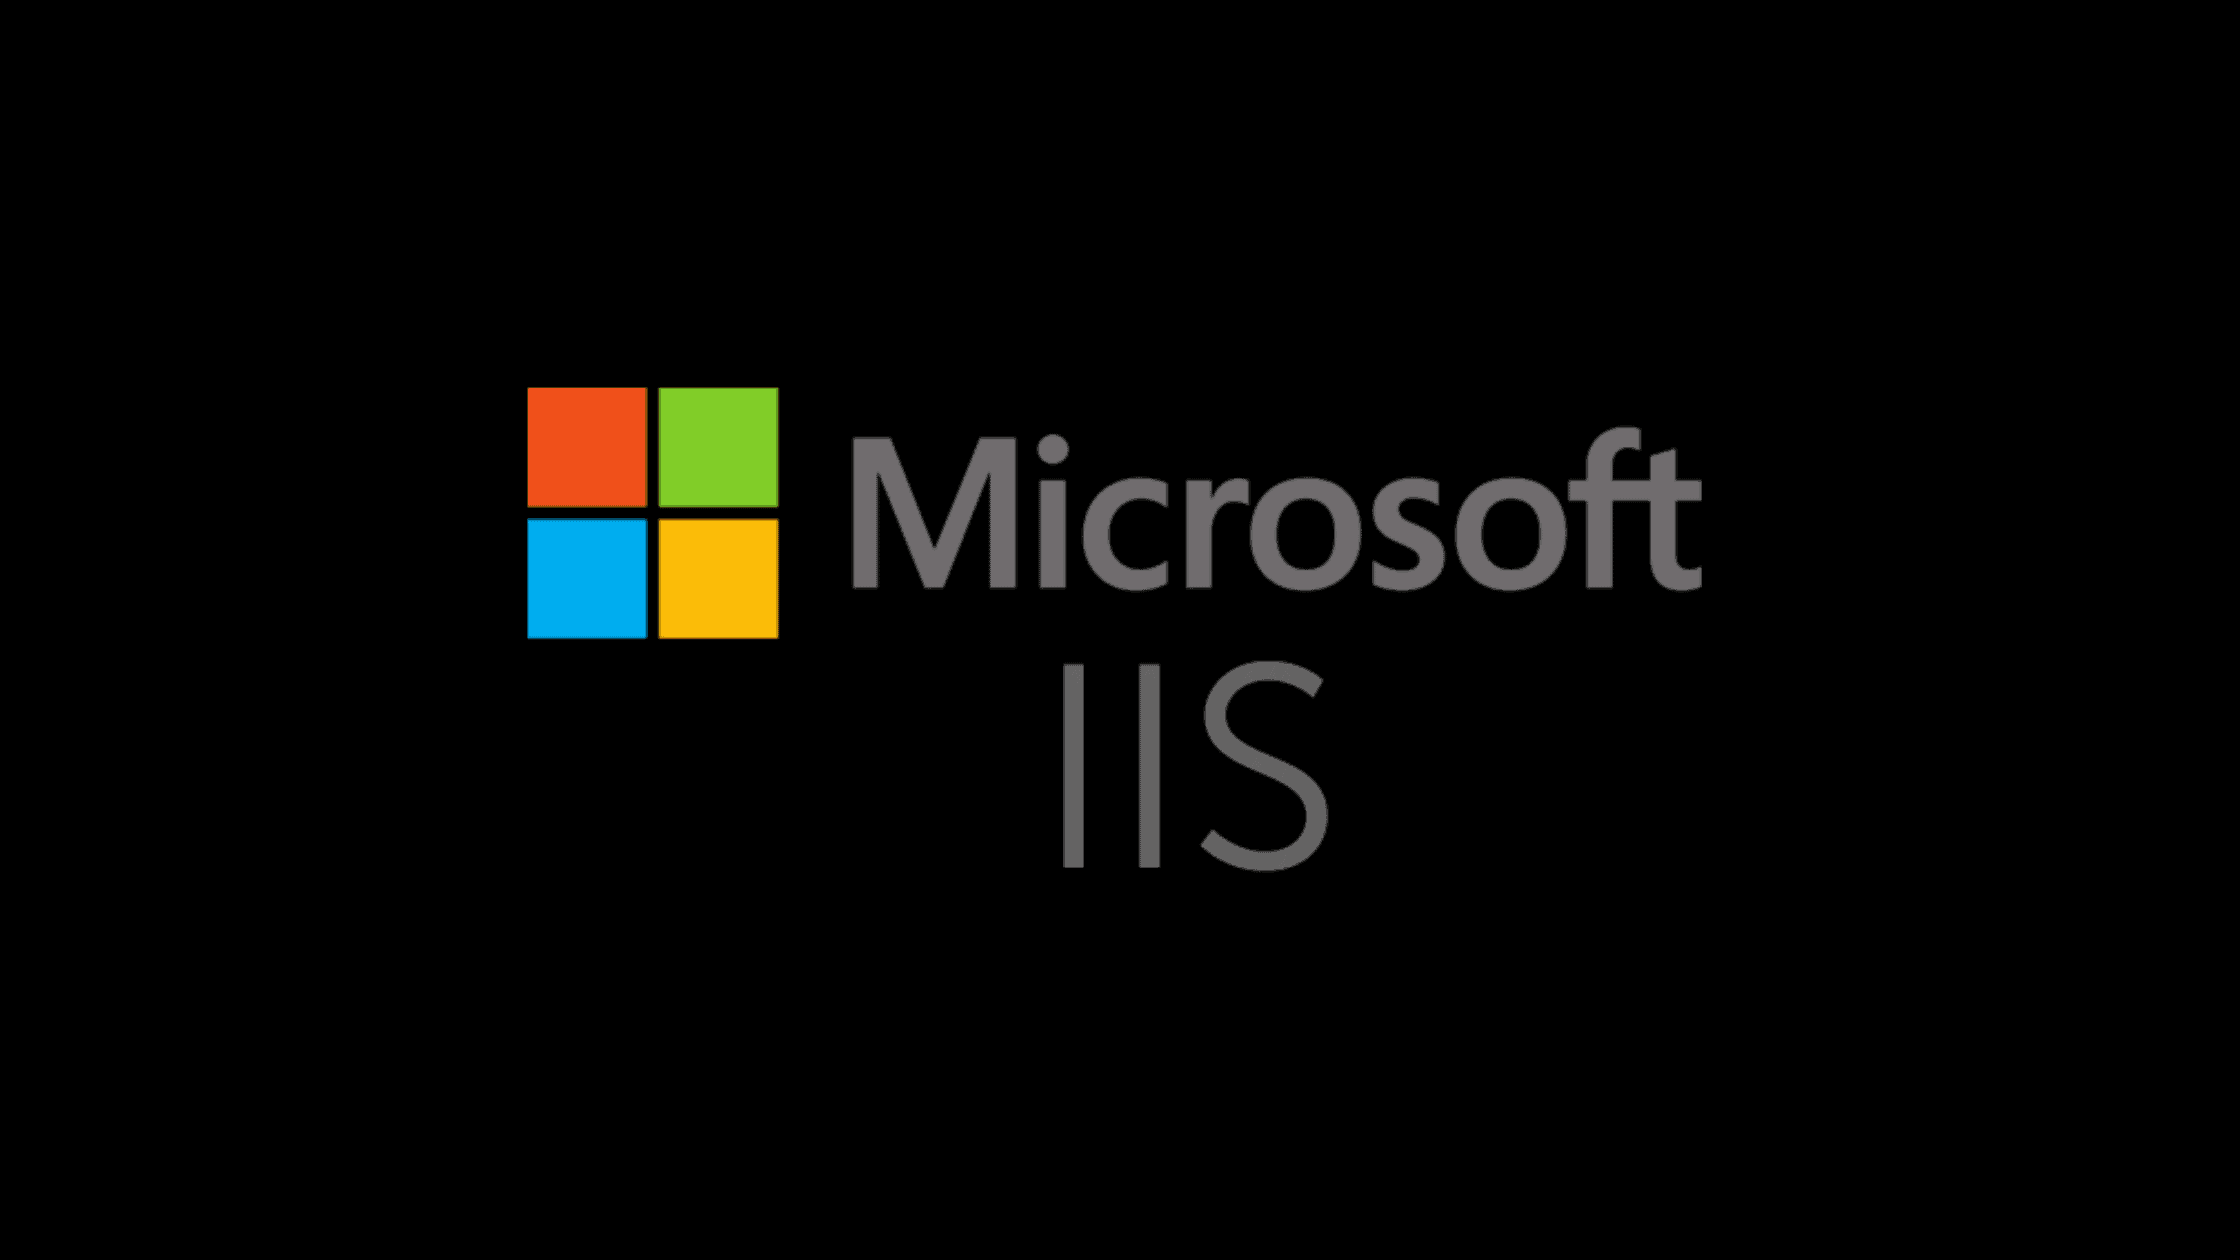 How To Protect Your Iis Servers From The Sessionmanager Backdoor